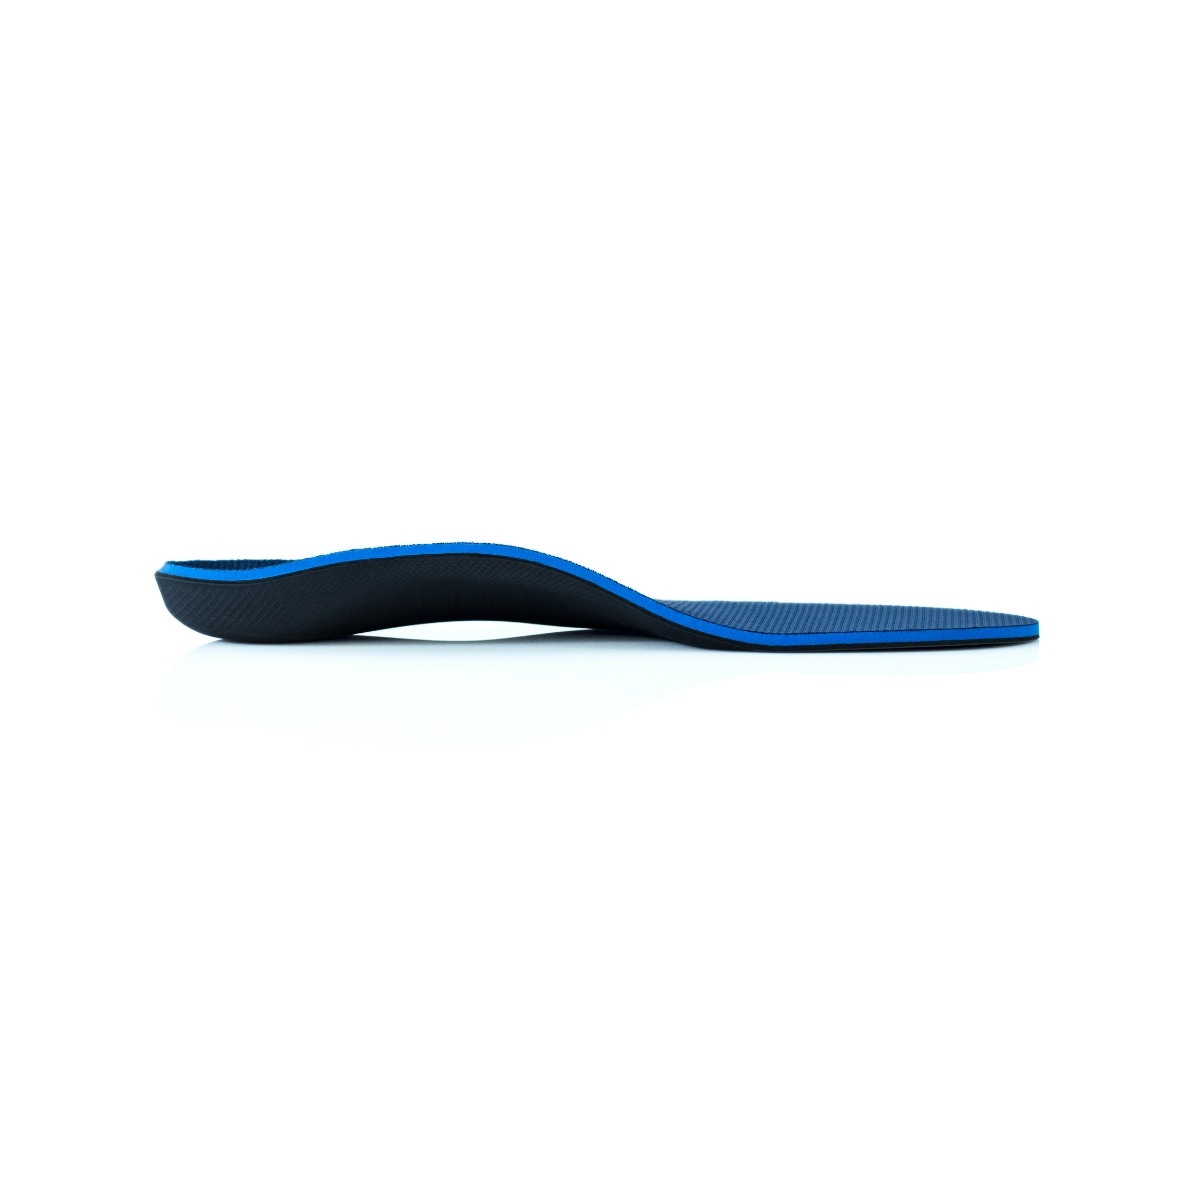 PowerStep ProTech Full Length Insoles